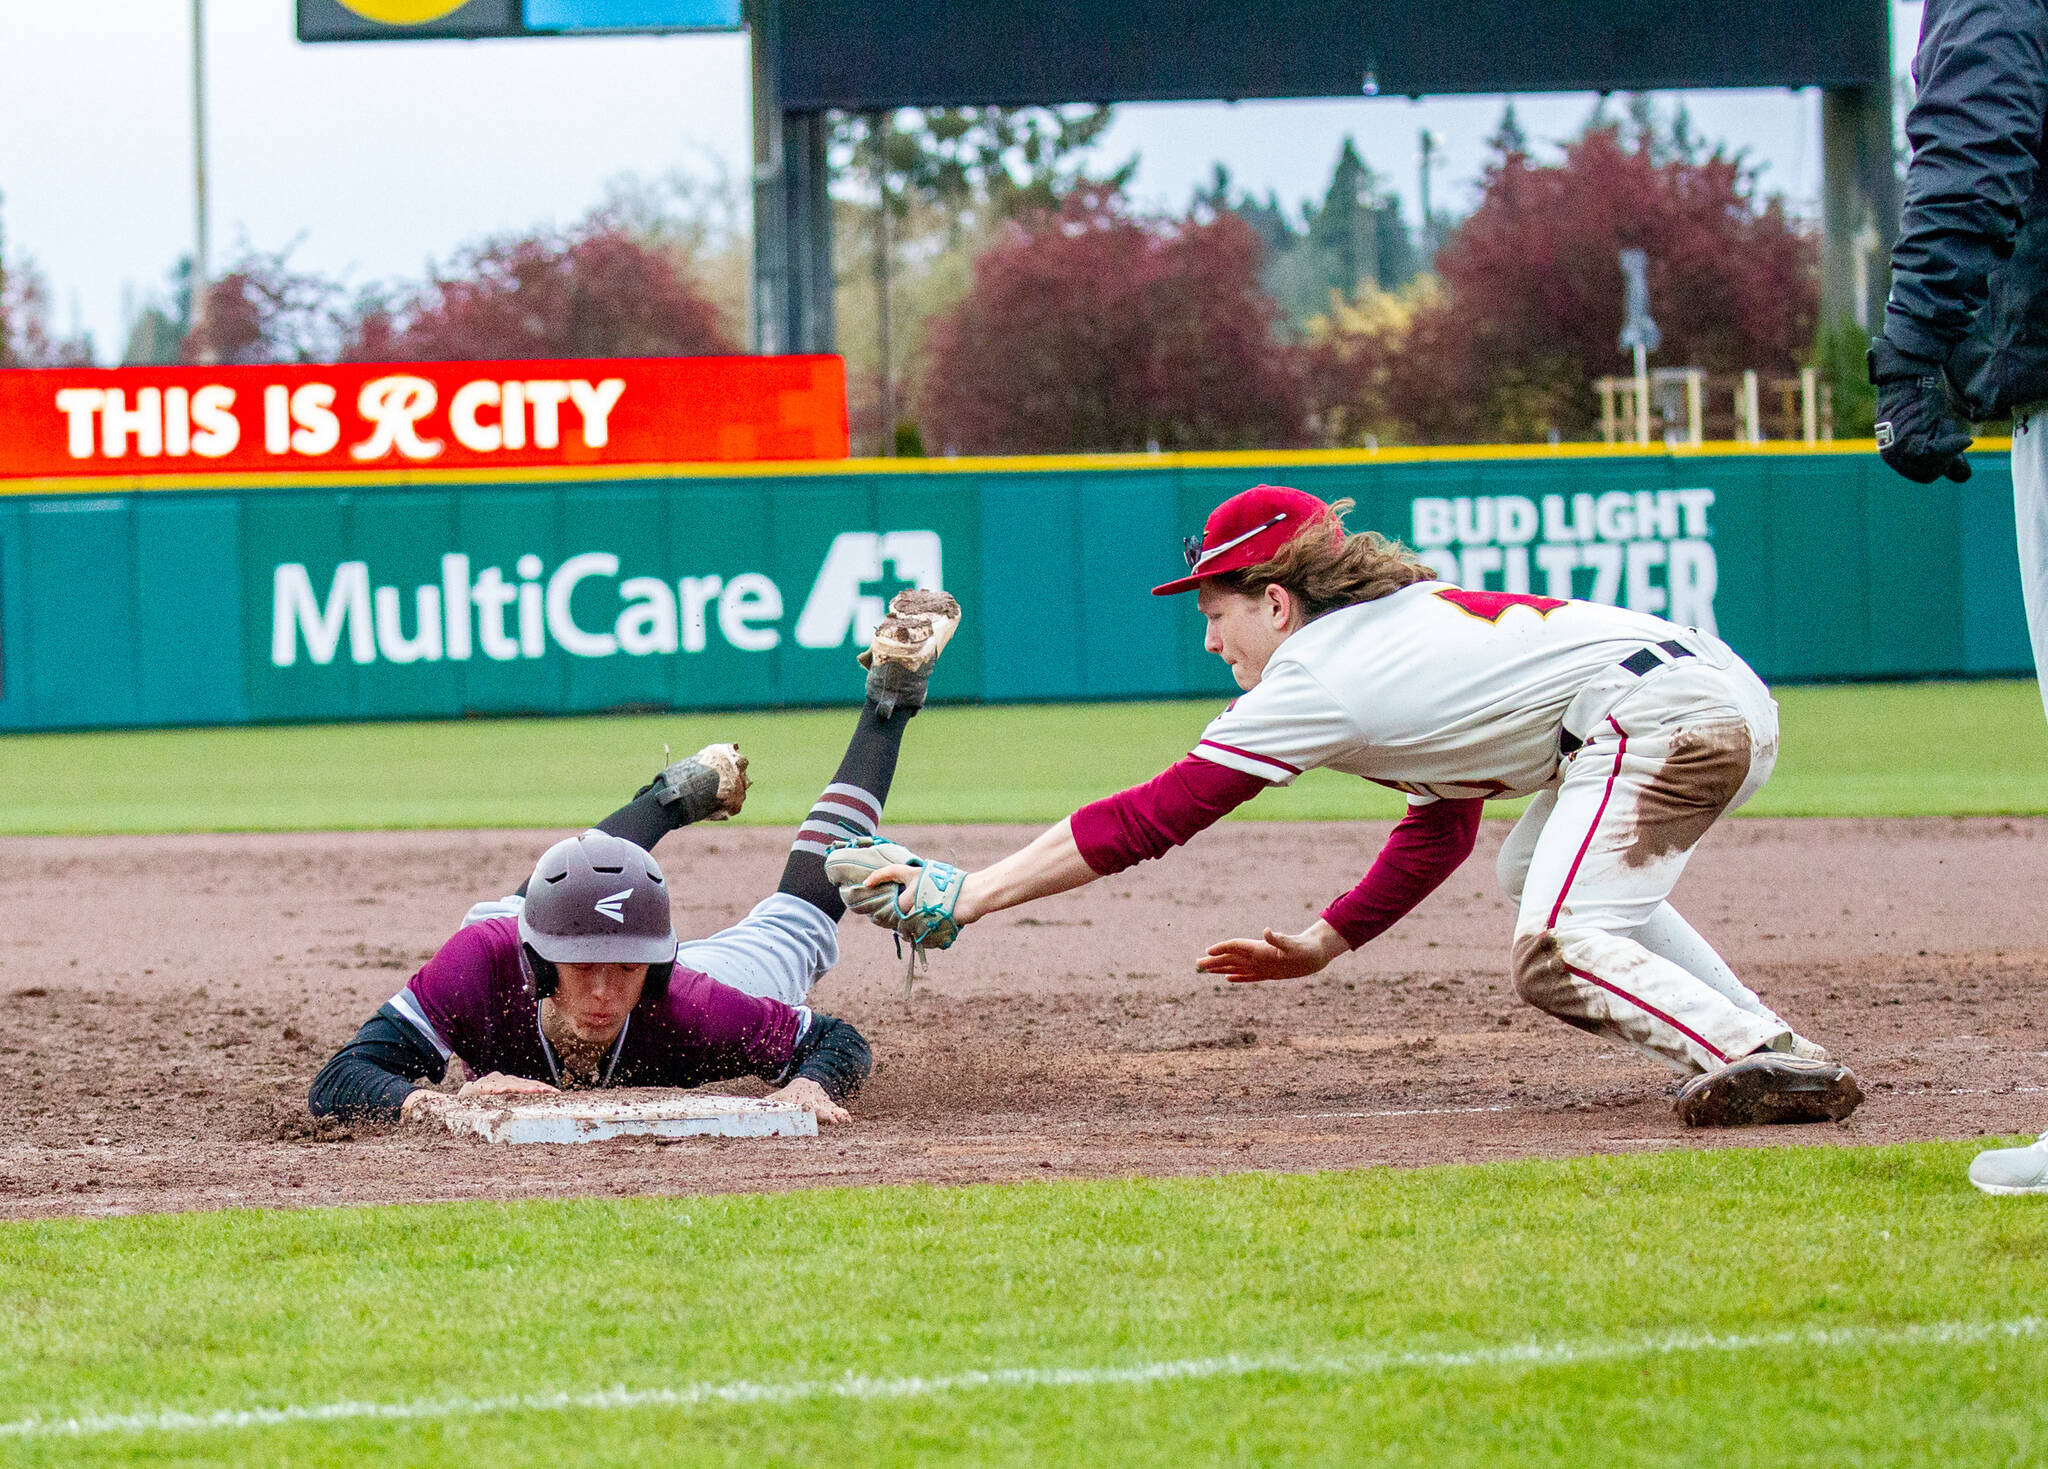 PHOTO BY SHAWN DONNELLY Montesano’s Jackson Busz dives back into first base during the Bulldogs’ 9-5 loss to Jefferson on Saturday at Cheney Stadium in Tacoma.